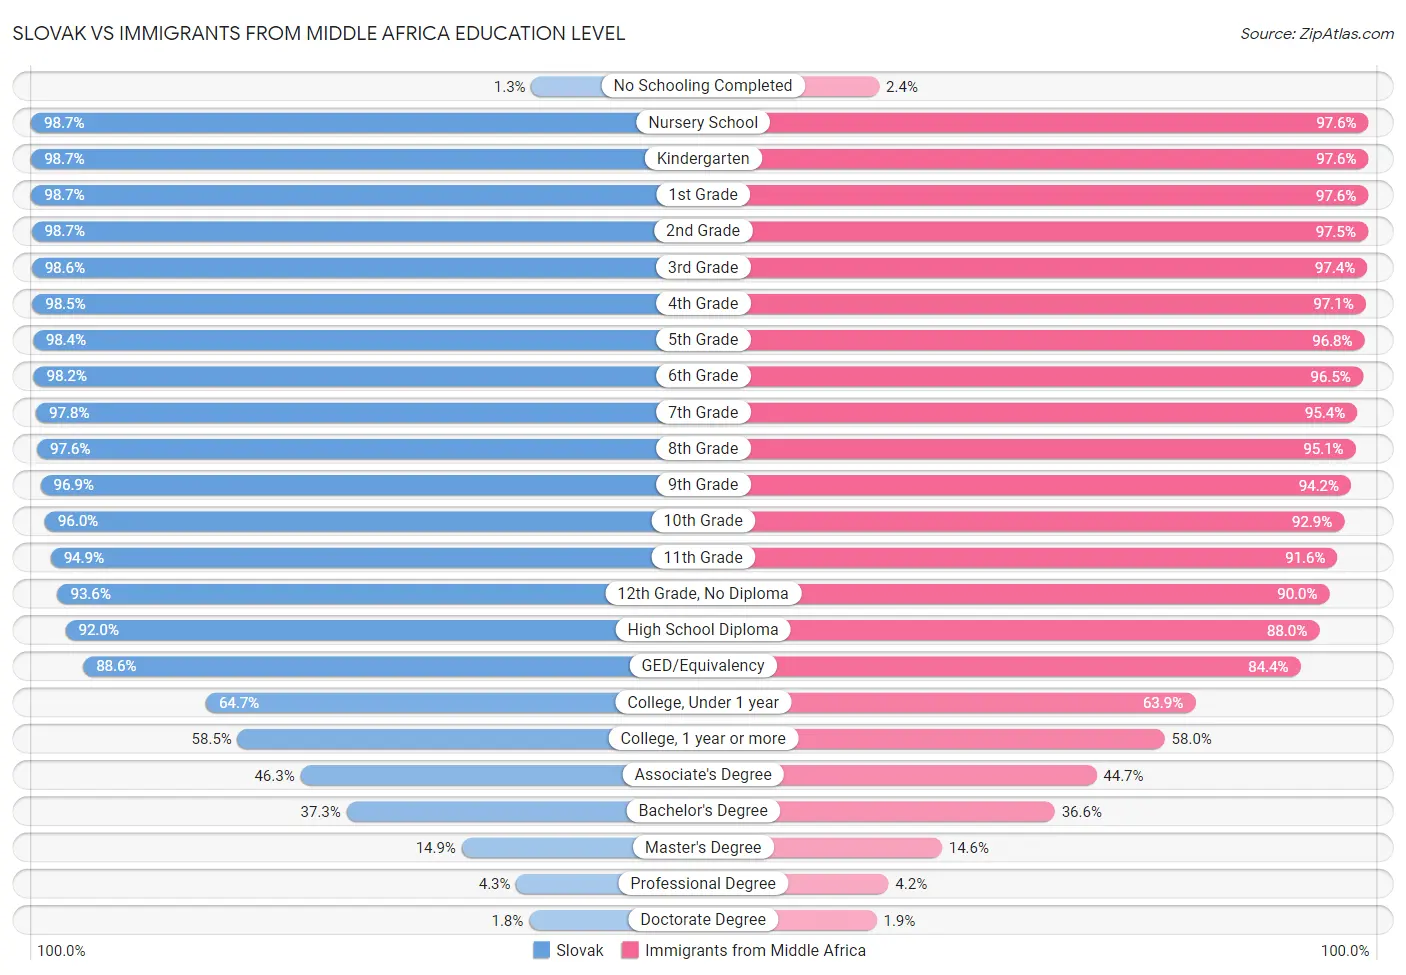 Slovak vs Immigrants from Middle Africa Education Level